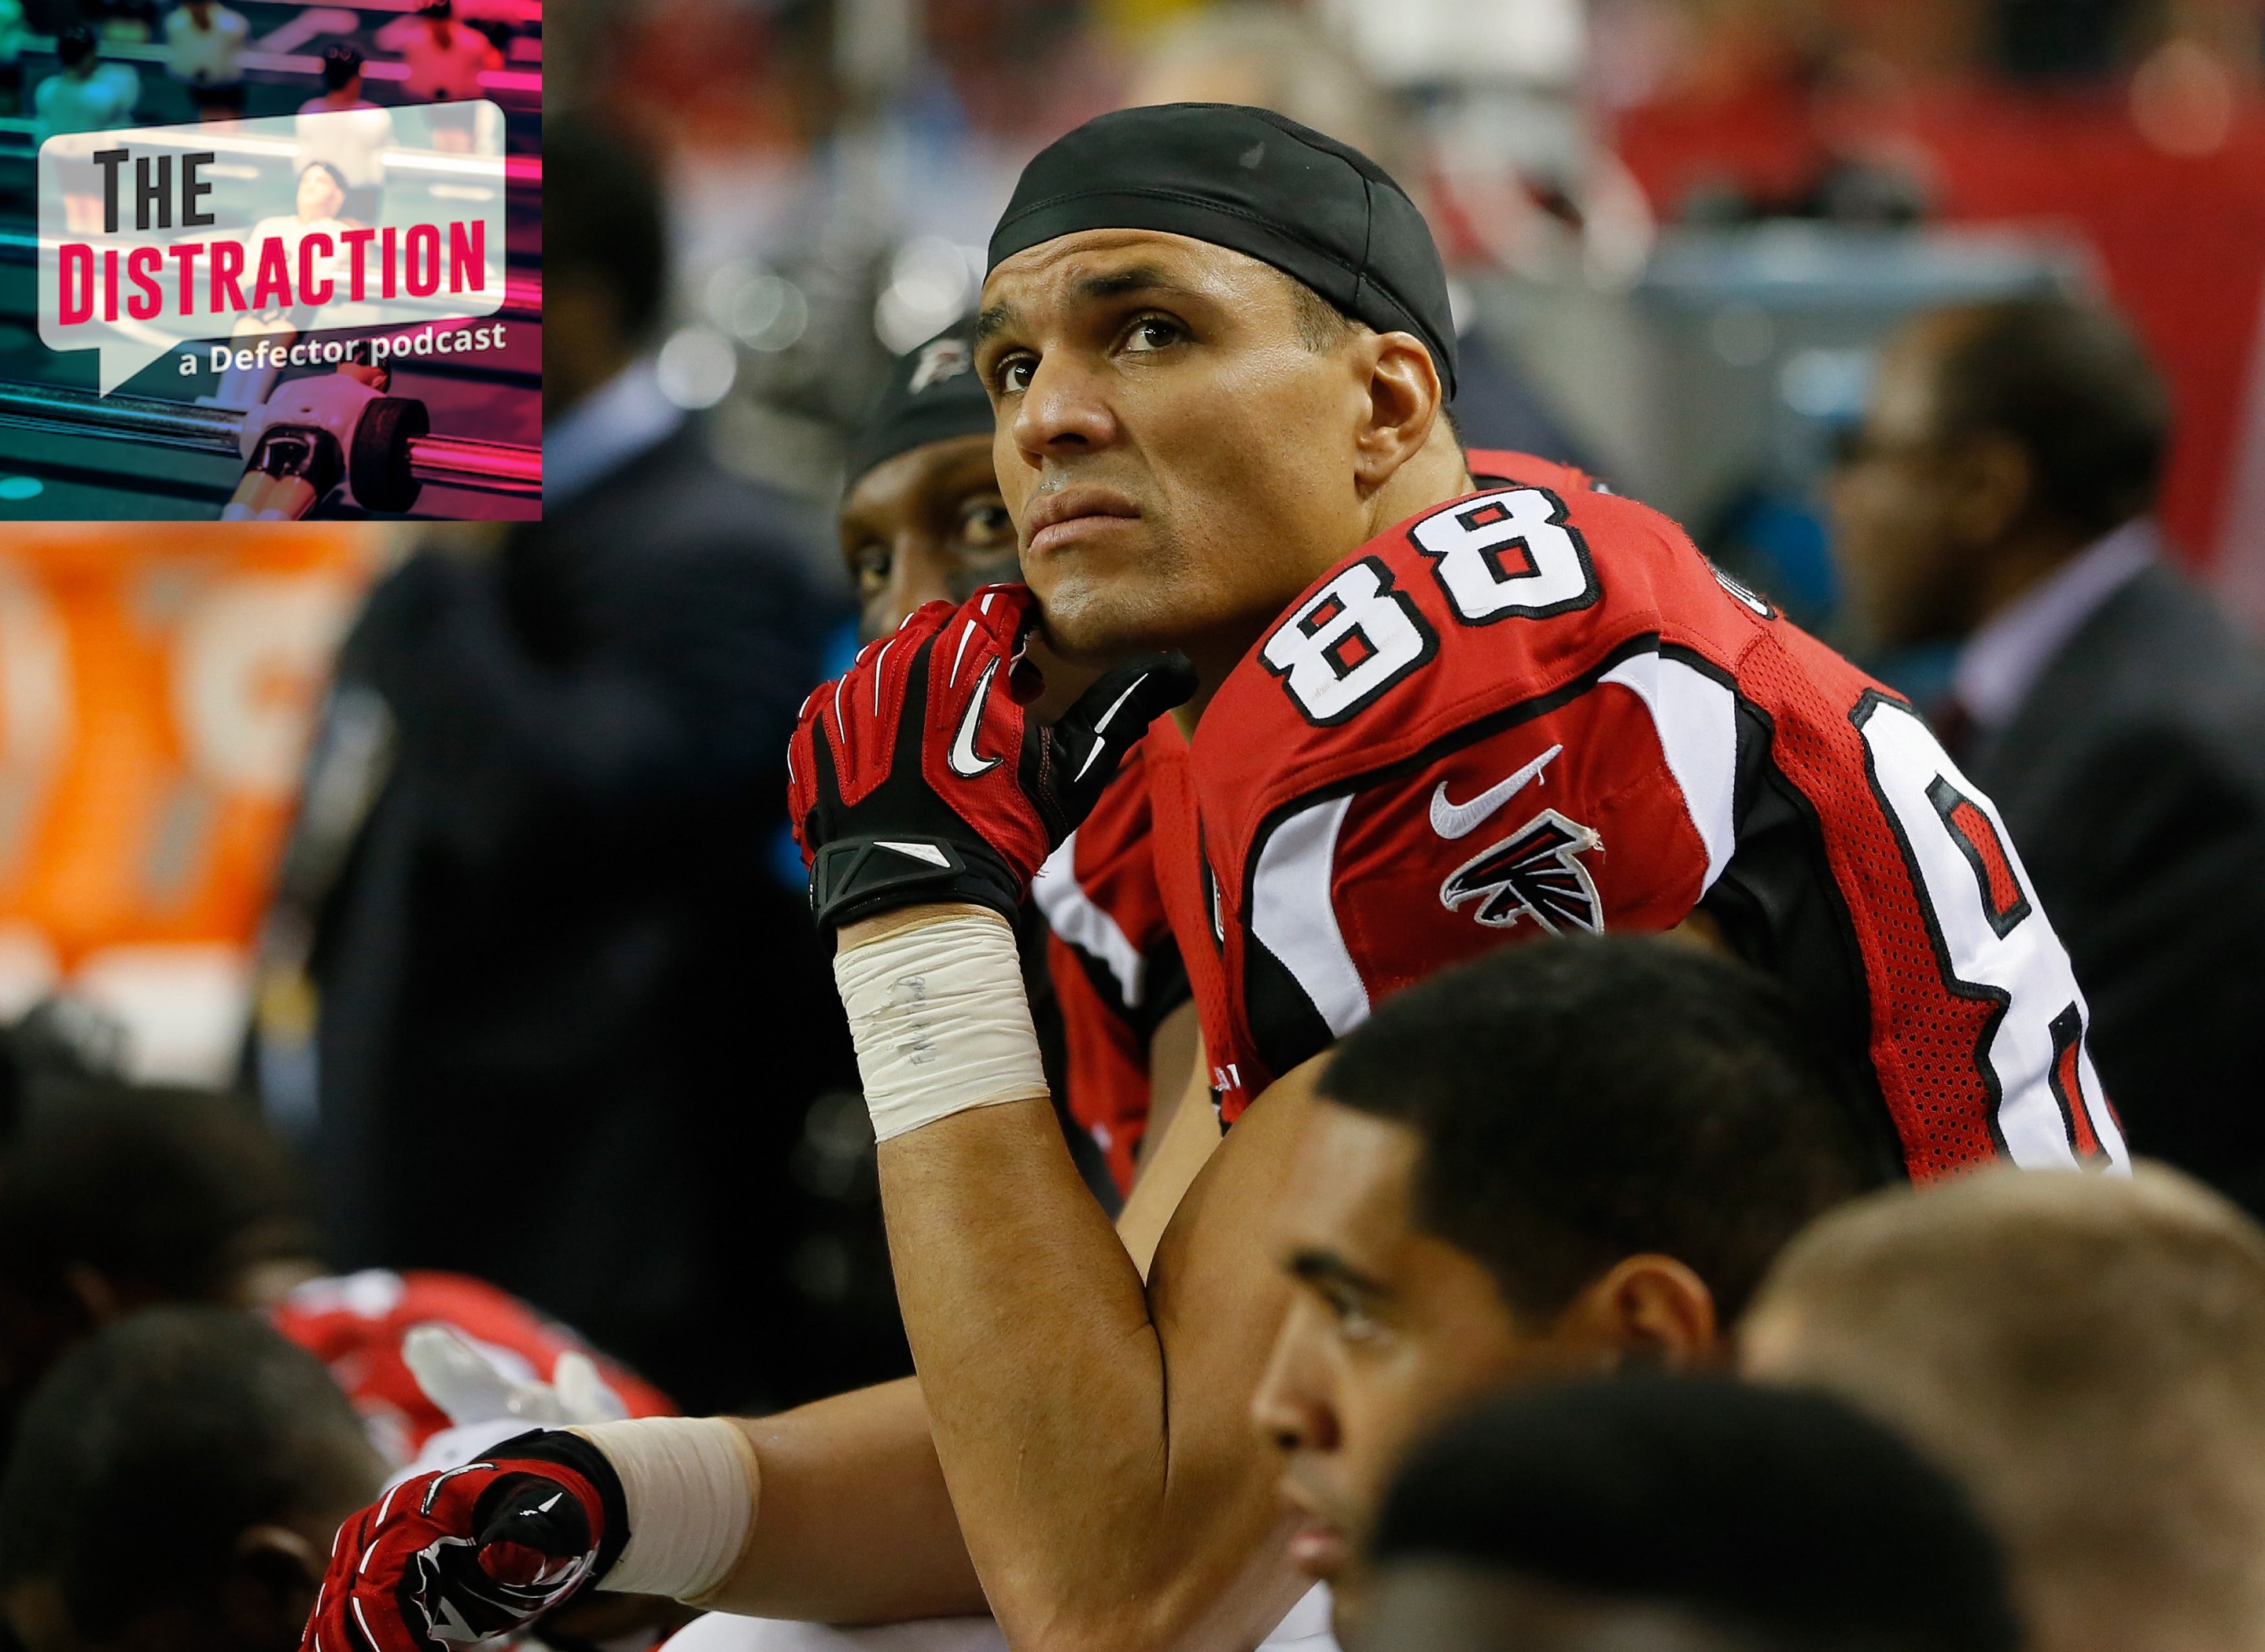 Tony Gonzalez looking at the Distraction logo, in uniform during his Atlanta Falcons years.